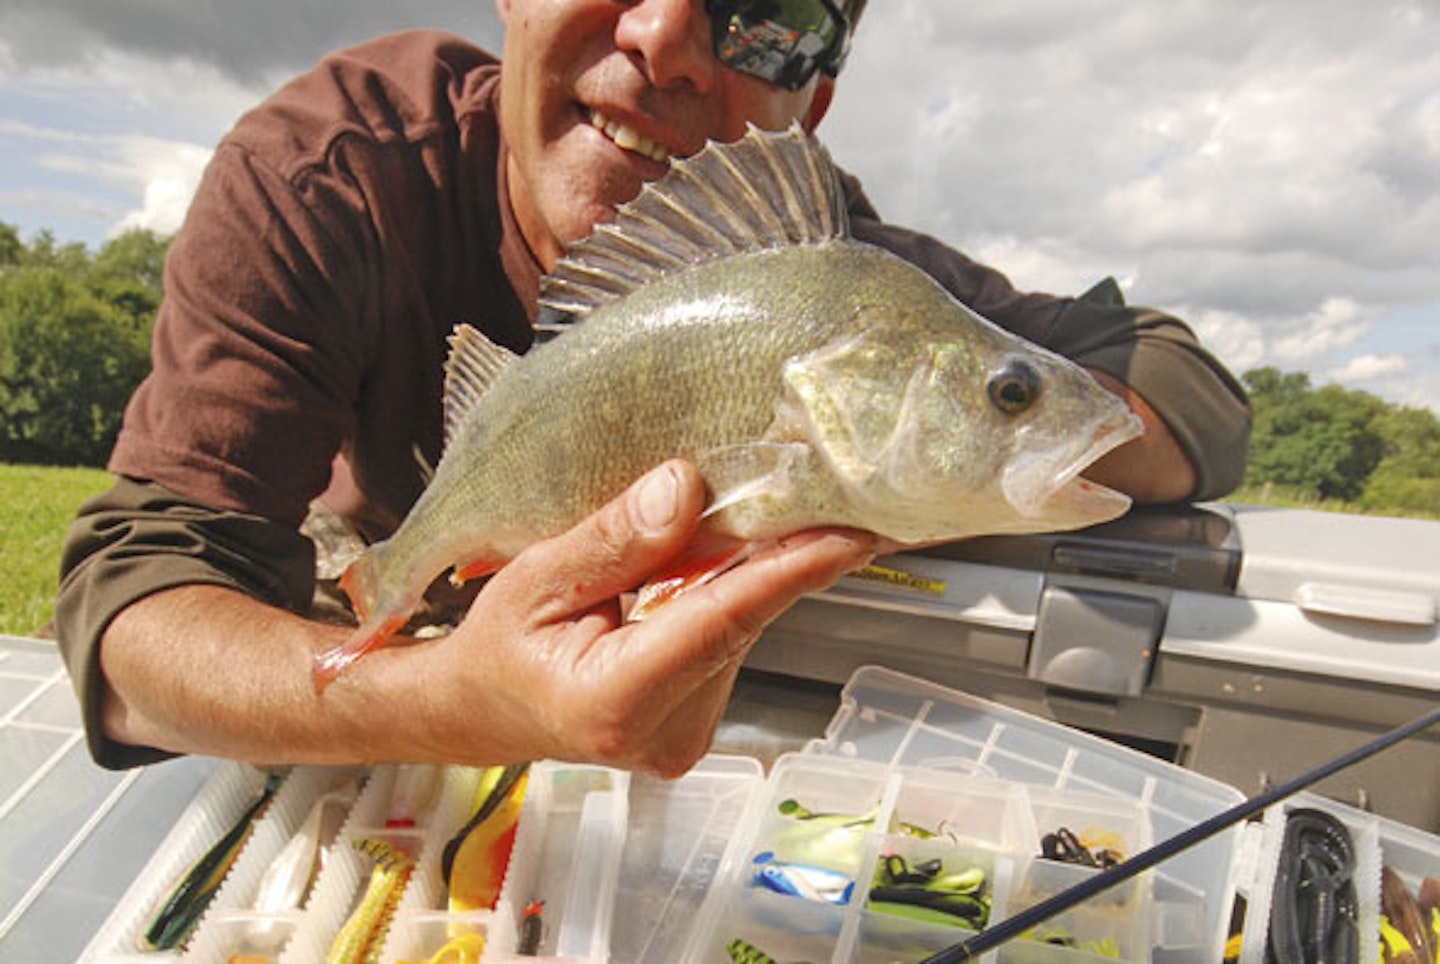 TRY FISHING WITH PLASTIC BAITS TO CATCH BIG PERCH